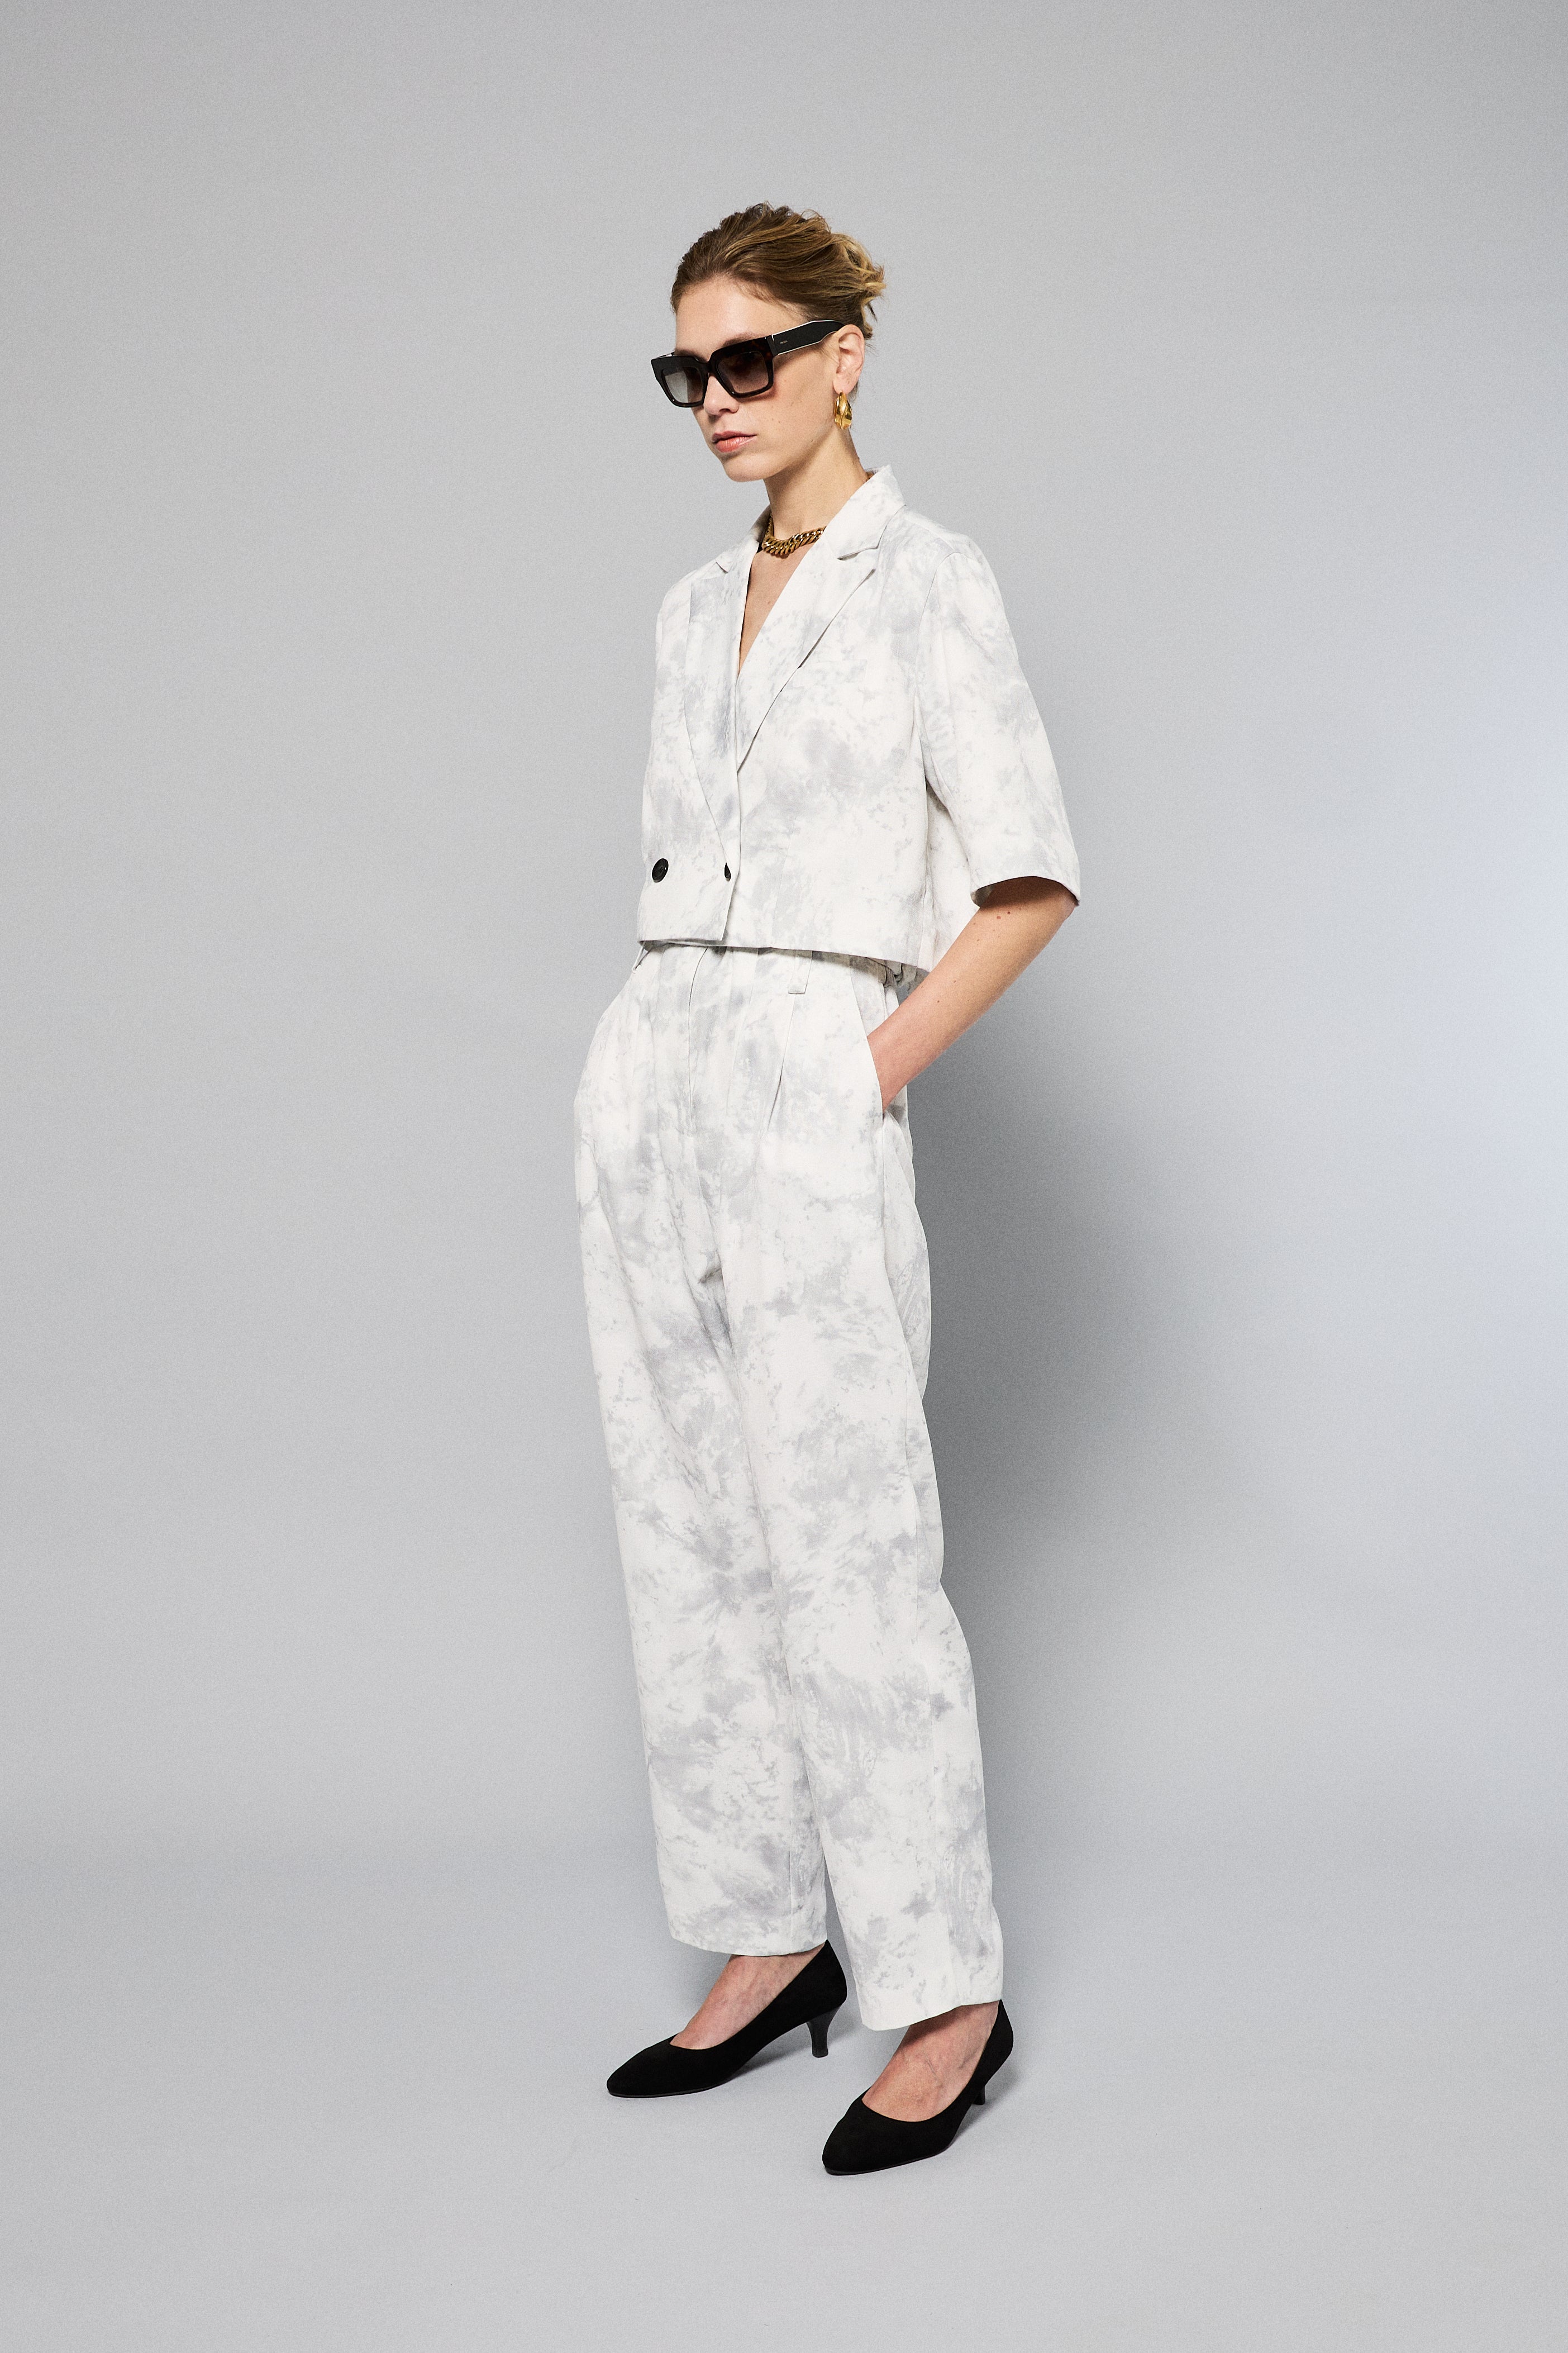 A person is wearing Maison Lilli Paperbag Pleated Pants - Marble Print. The pants have pockets and a removable belt. The person also sports a matching top and black high-heeled shoes against a plain light gray background.